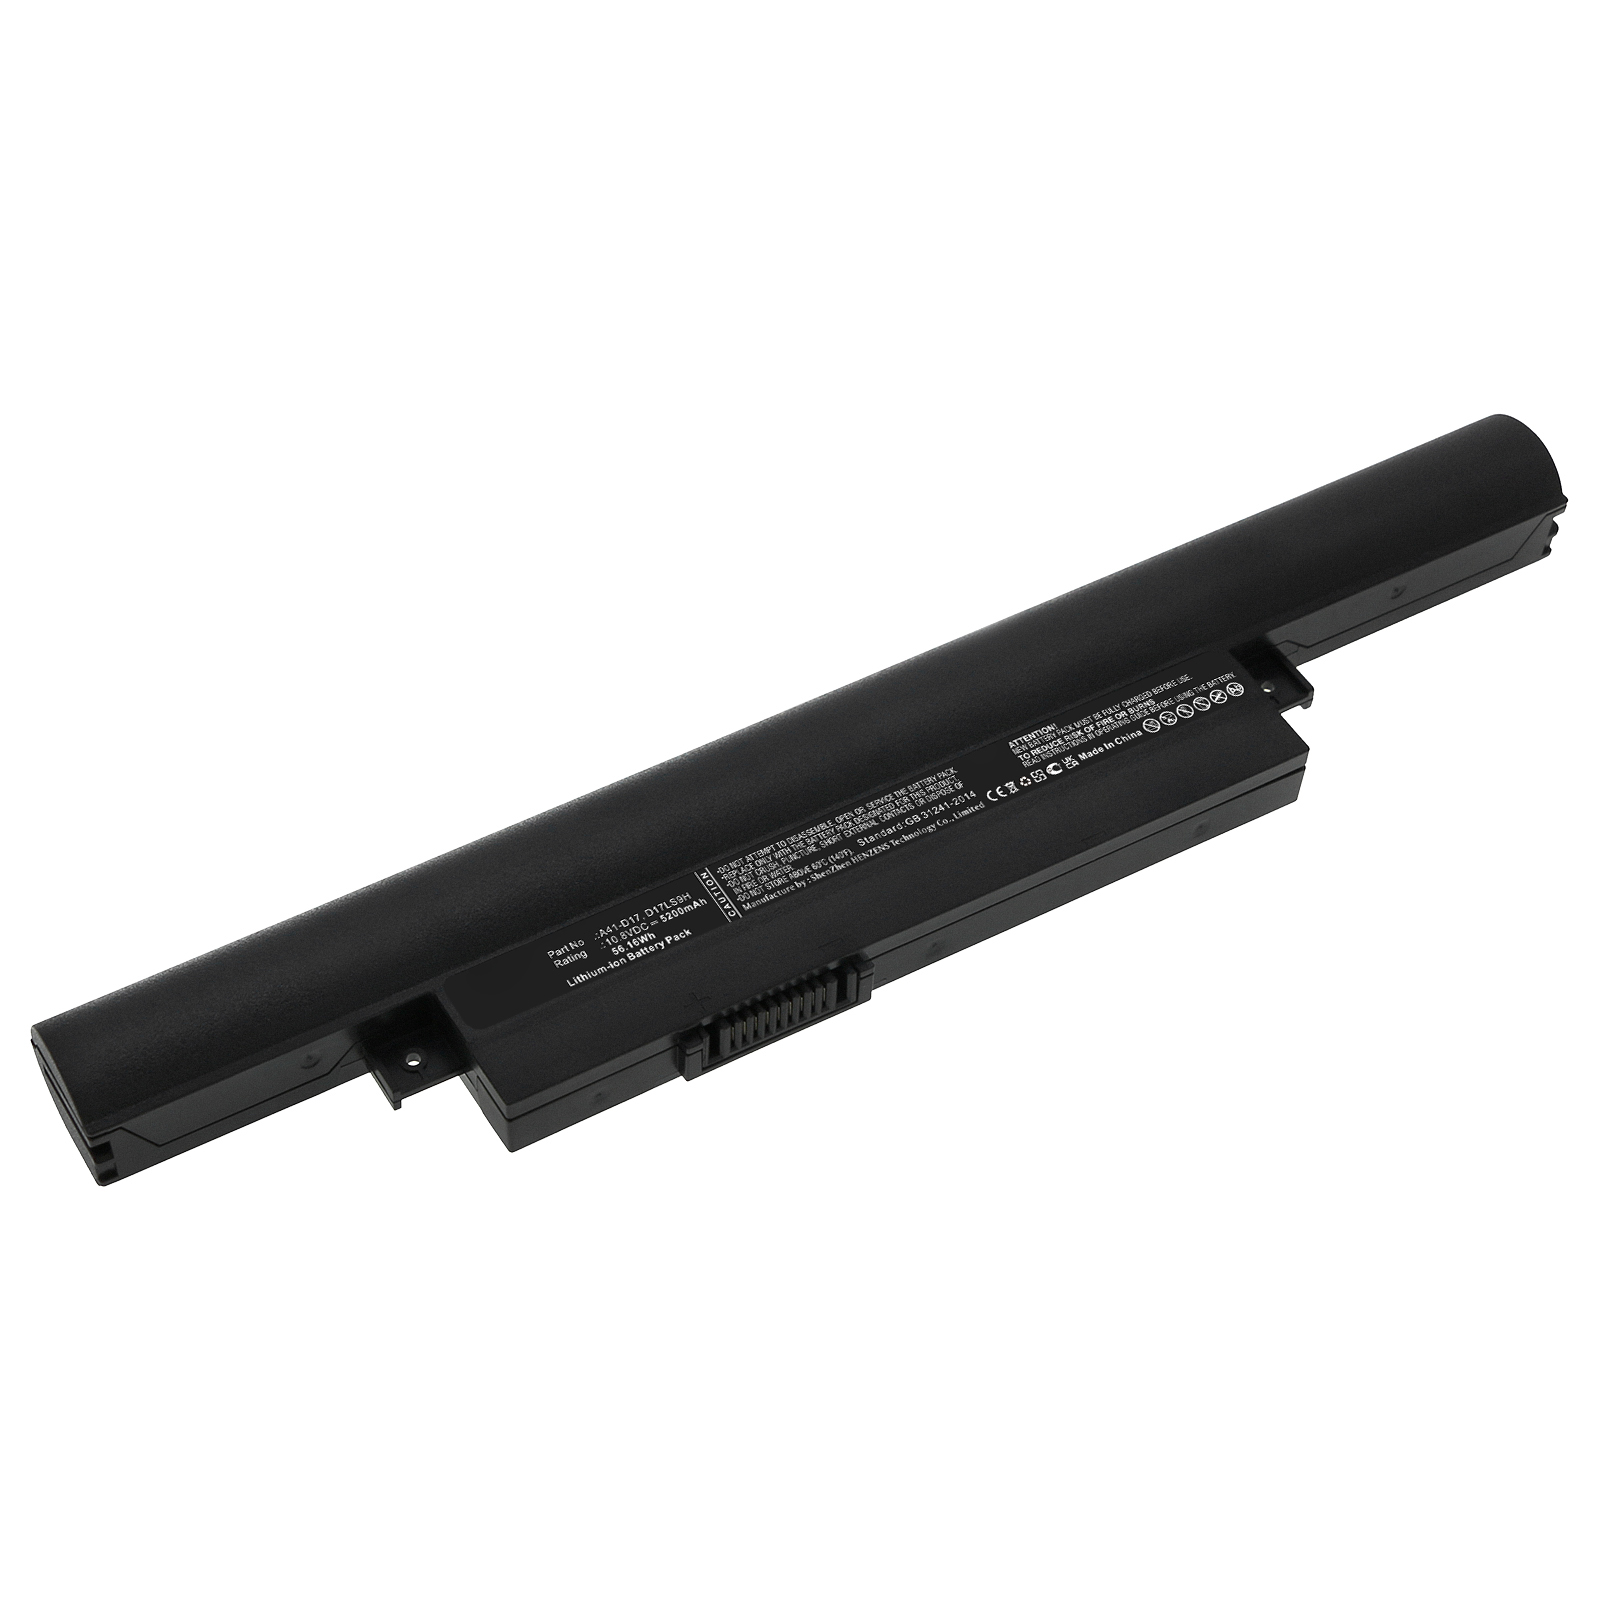 Synergy Digital Laptop Battery, Compatible with Medion D17LC29H Laptop Battery (Li-ion, 10.8V, 5200mAh)